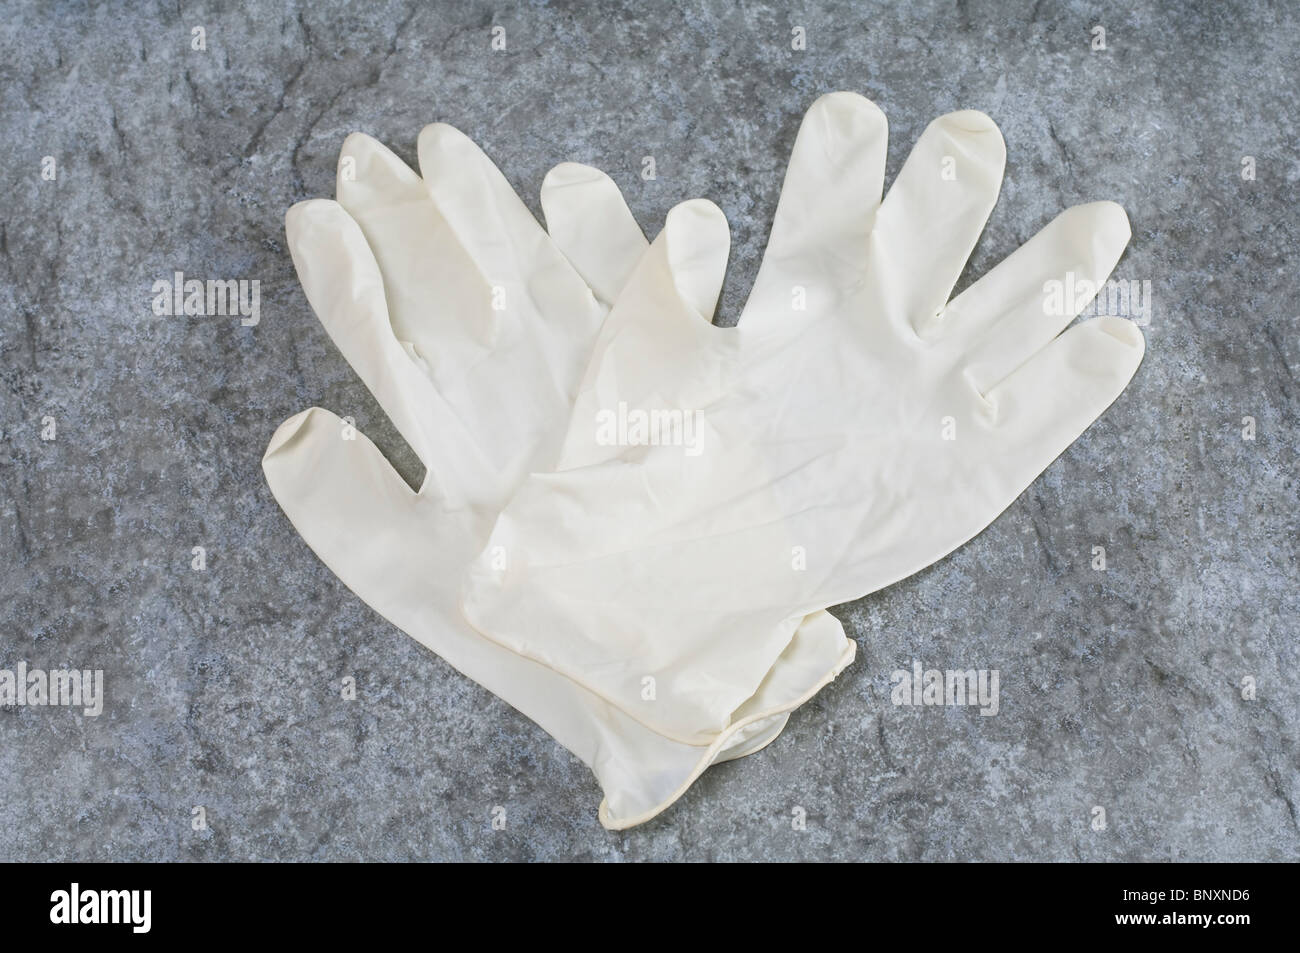 A pair of medical latex rubber gloves Stock Photo